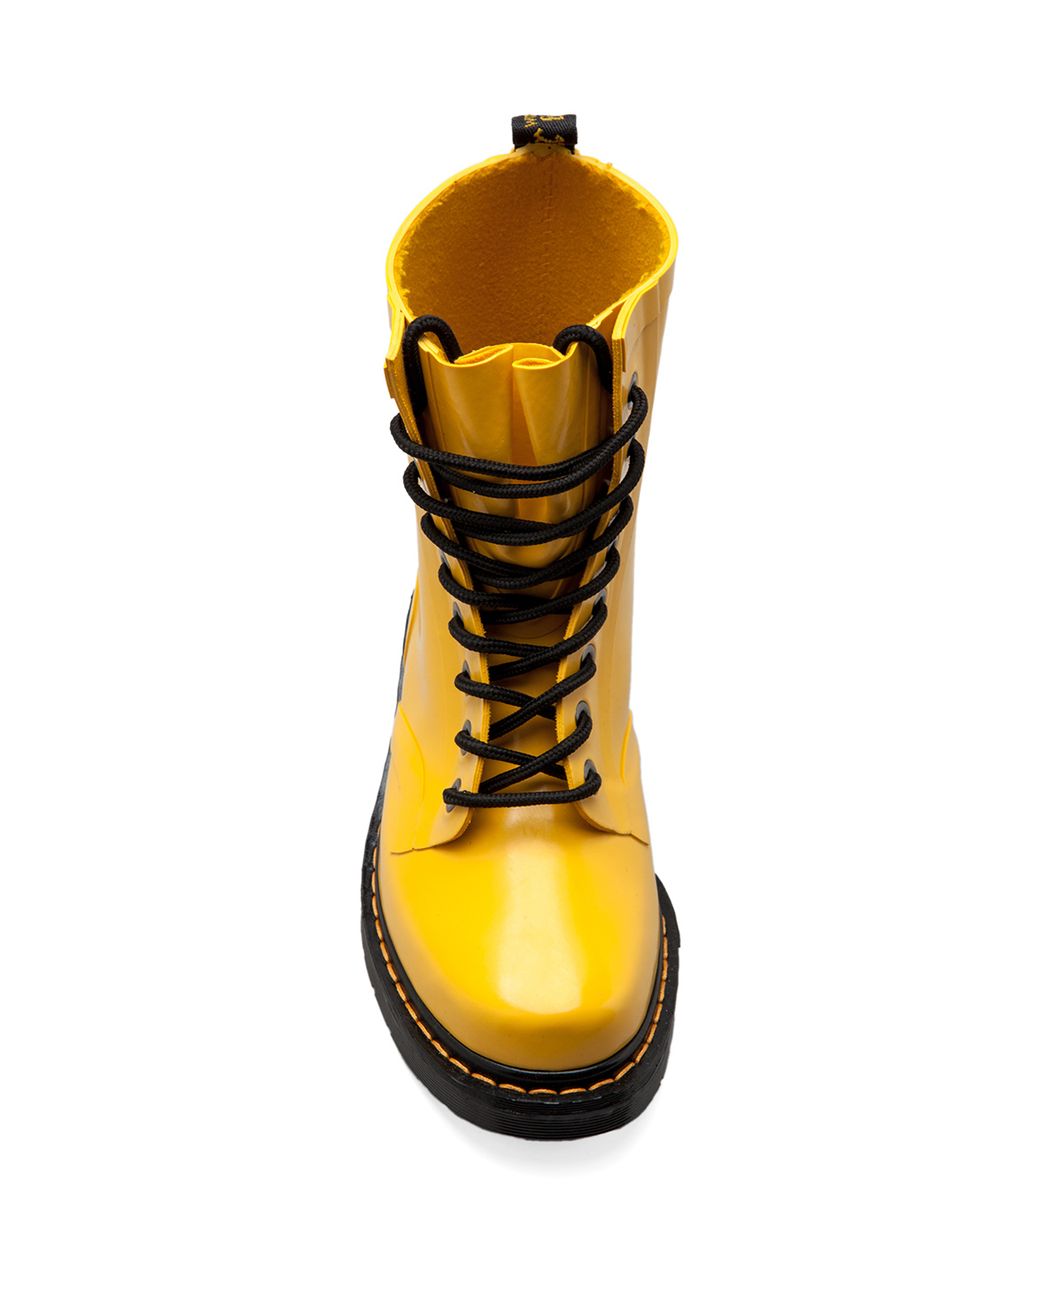 Dr. Martens Drench 8eye Rain Boot in Yellow | Lyst